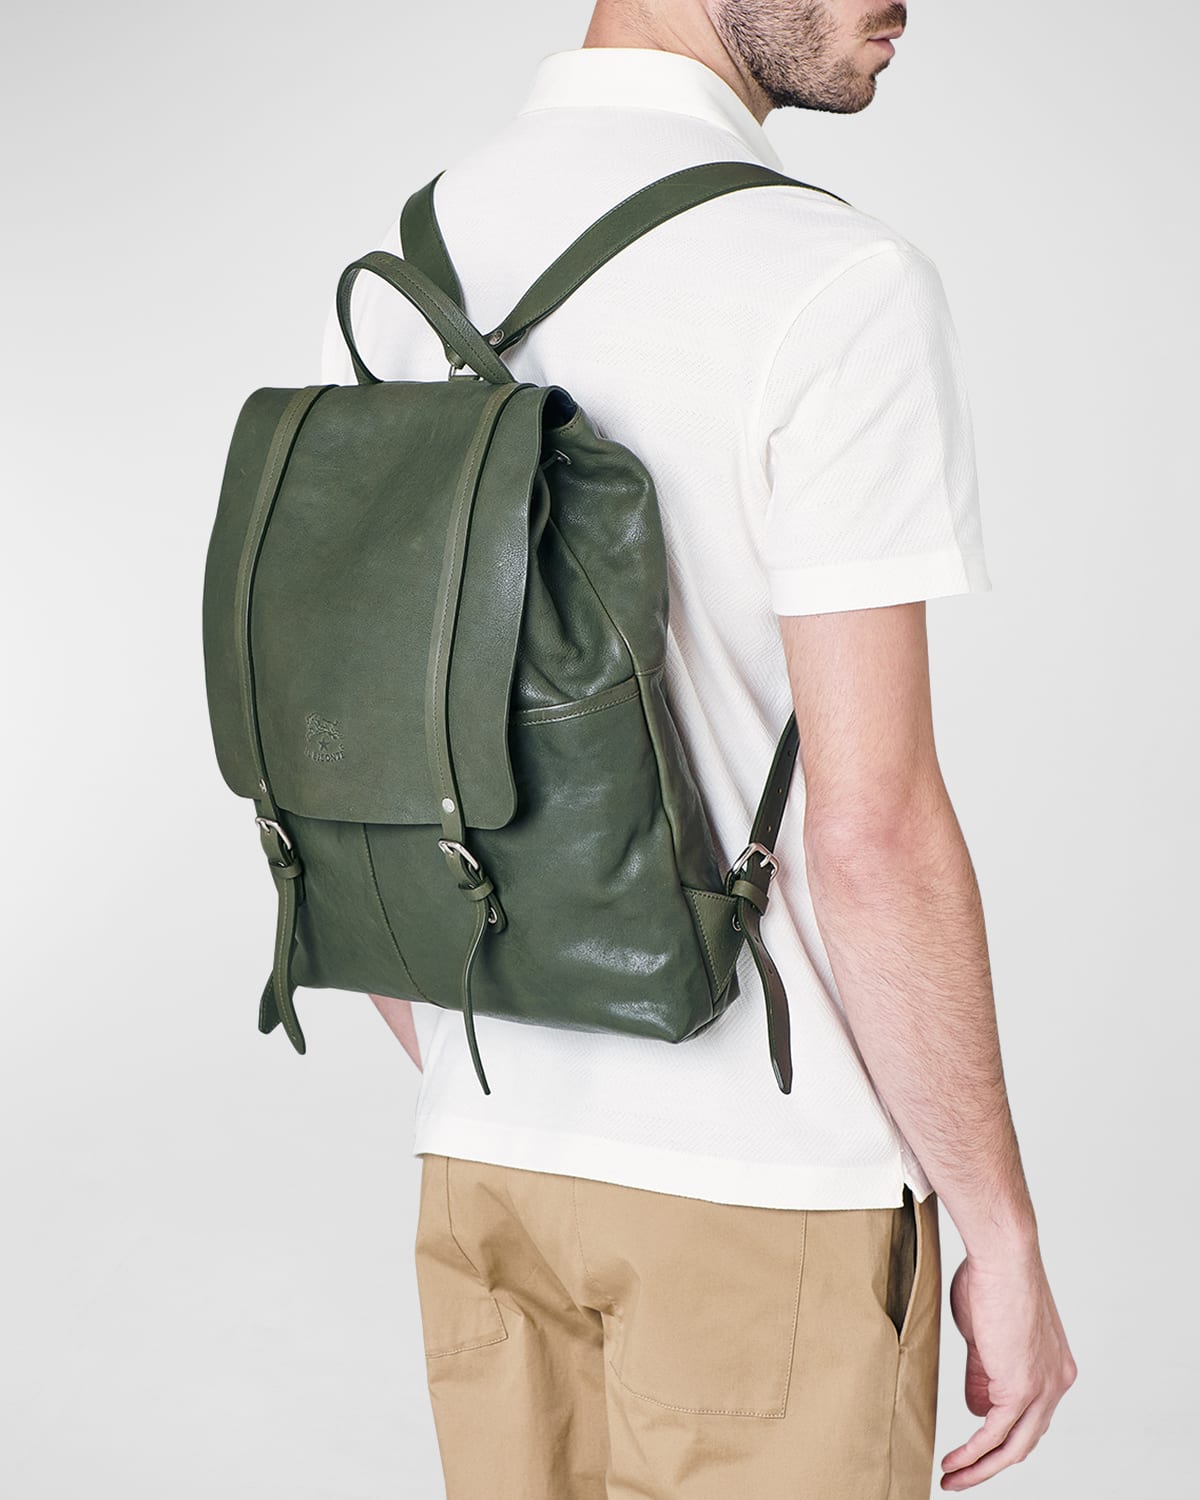 Men's Trappola Leather Drawstring Backpack